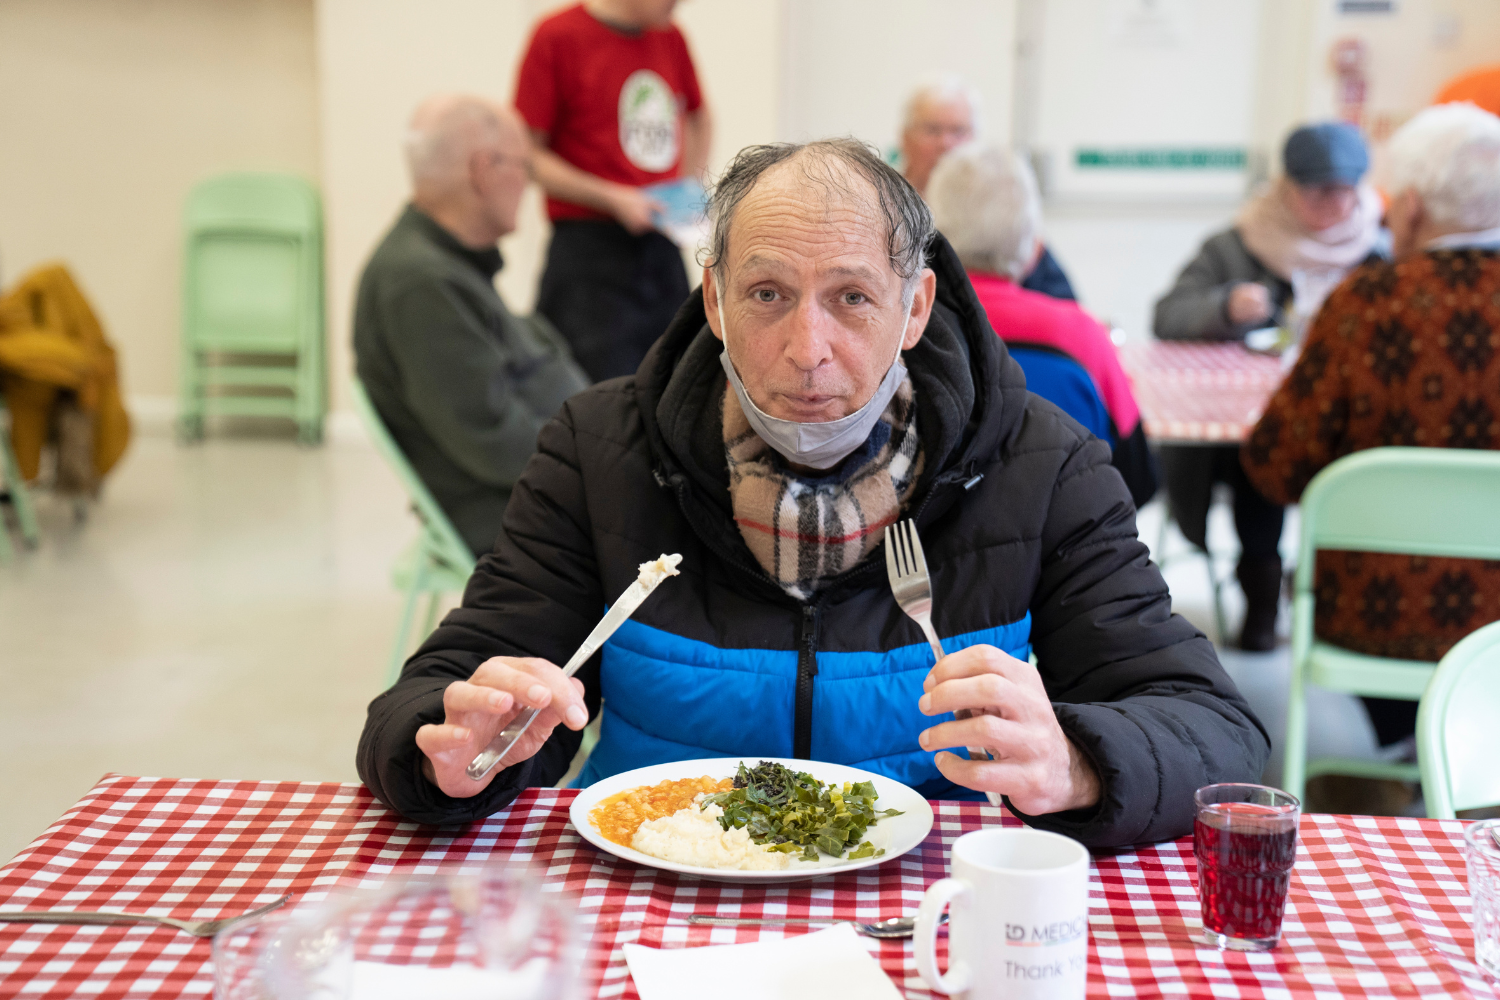 Man eating FoodCycle community meal